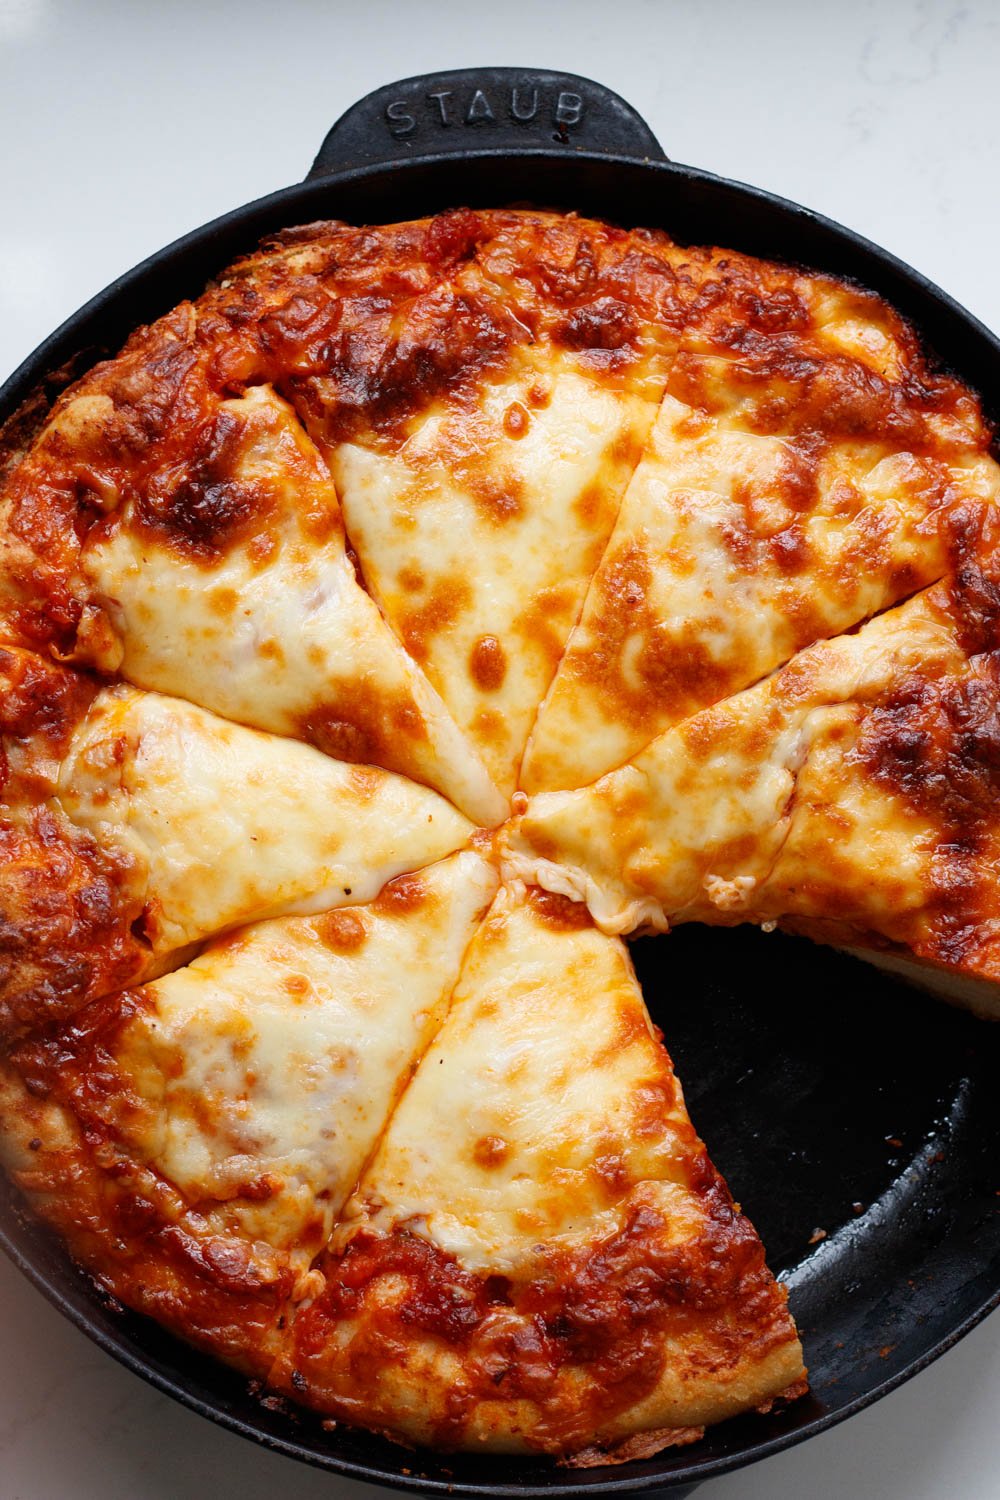 Homemade Pan Pizza Crust Recipe (and Friday Pizza Tradition)